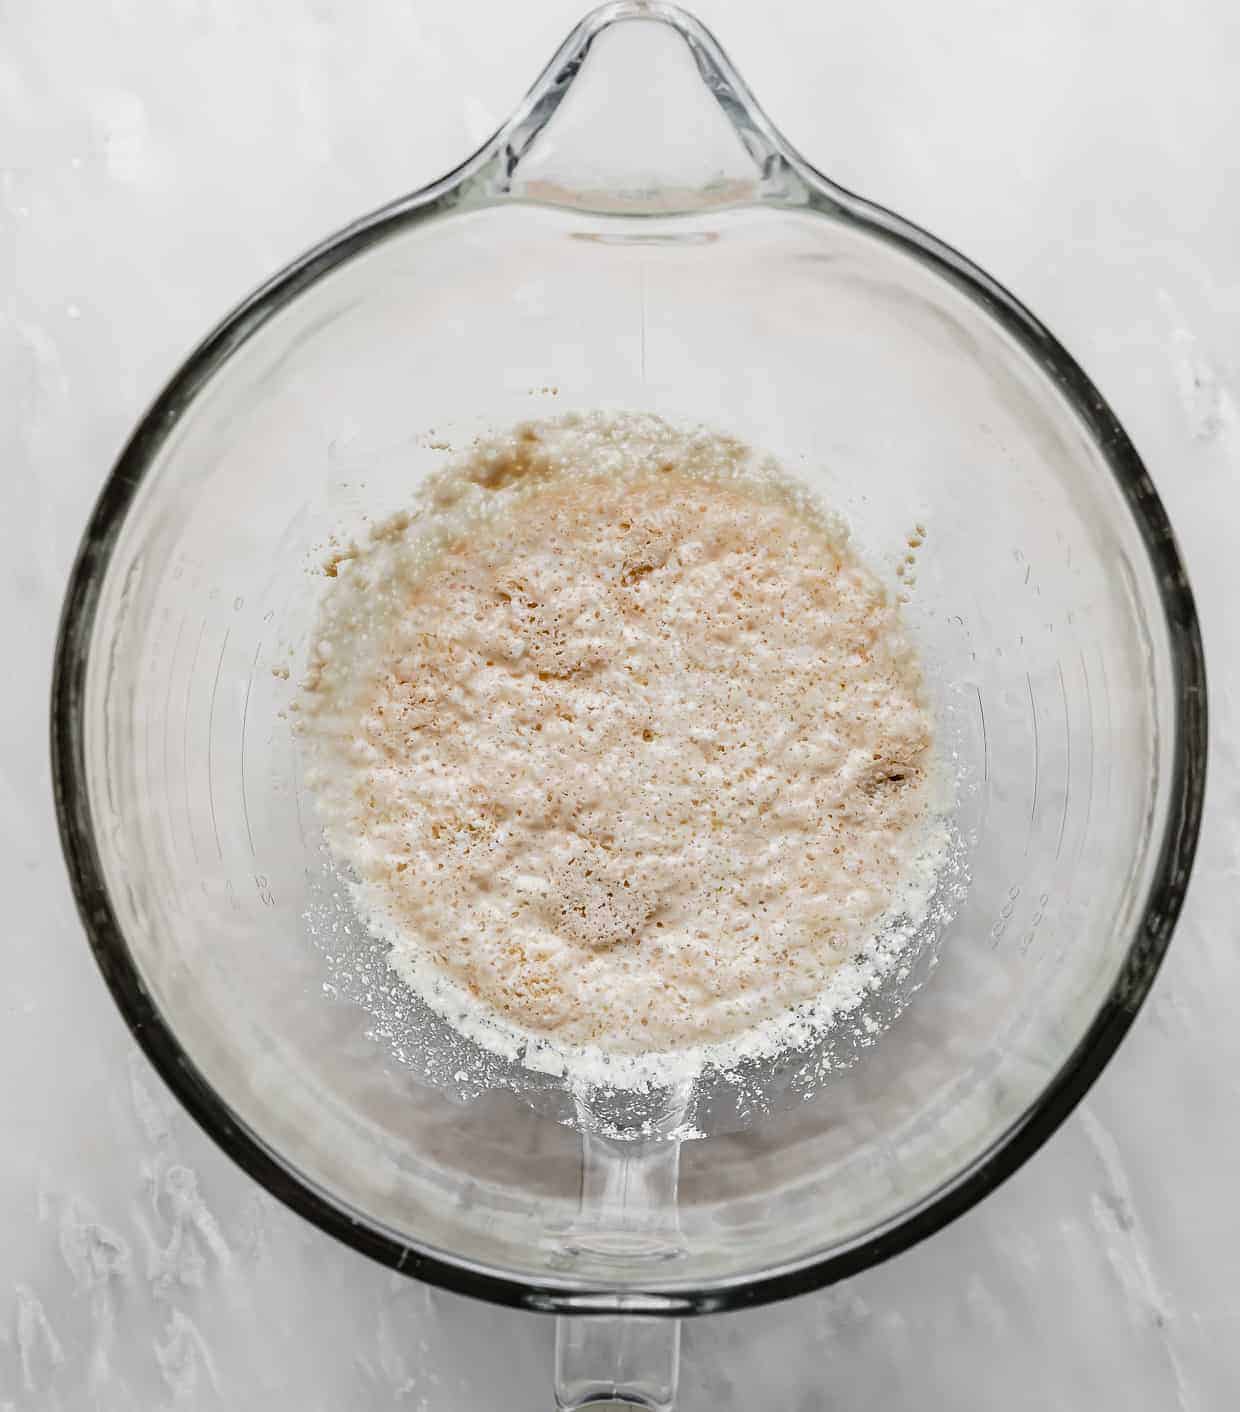 A foamy yeast mixture in a glass stand mixer bowl.